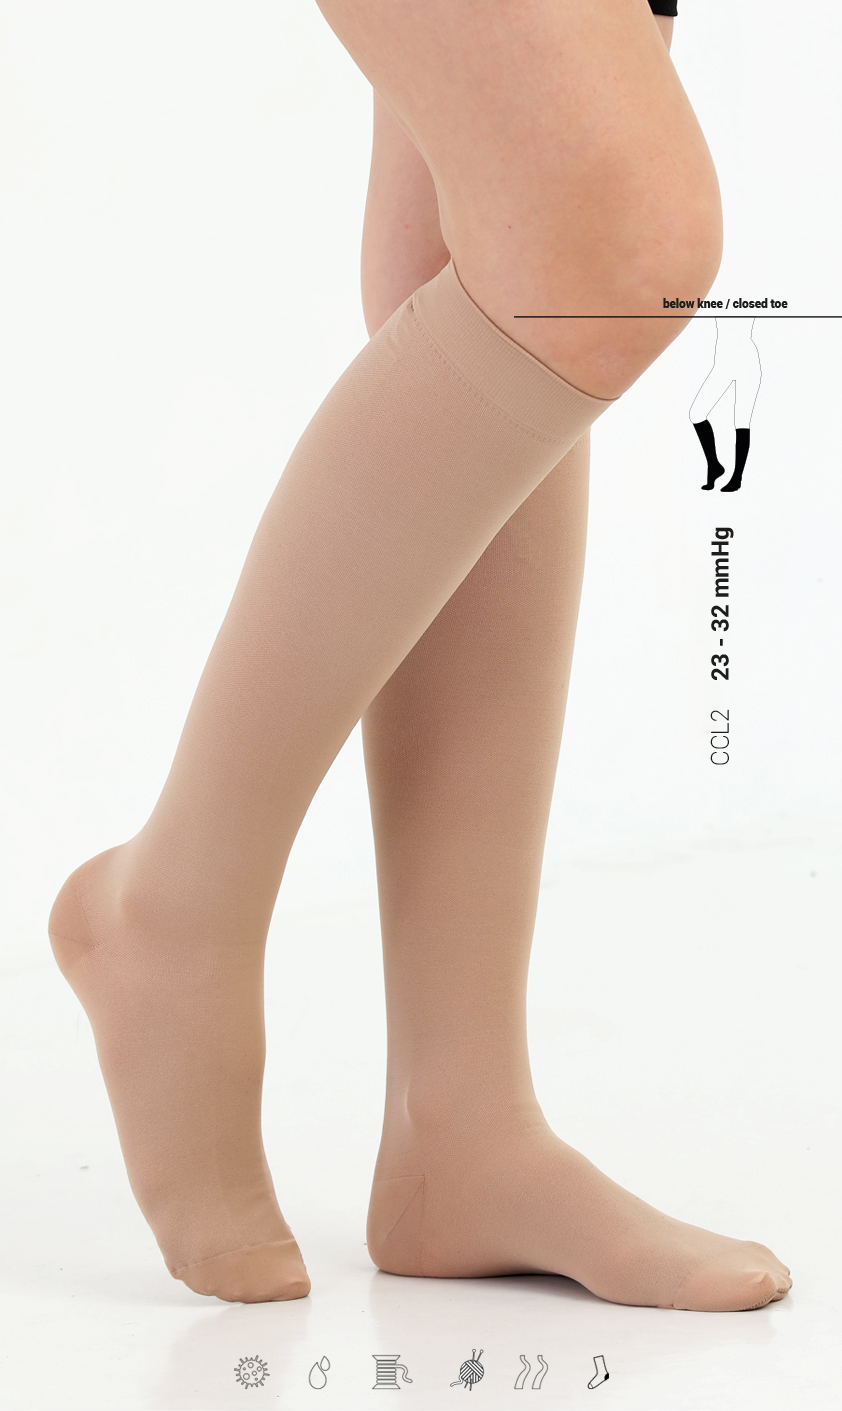 COMPRESSION STOCKING BELOW THE KNEE (CLOSED TOE) CCL2